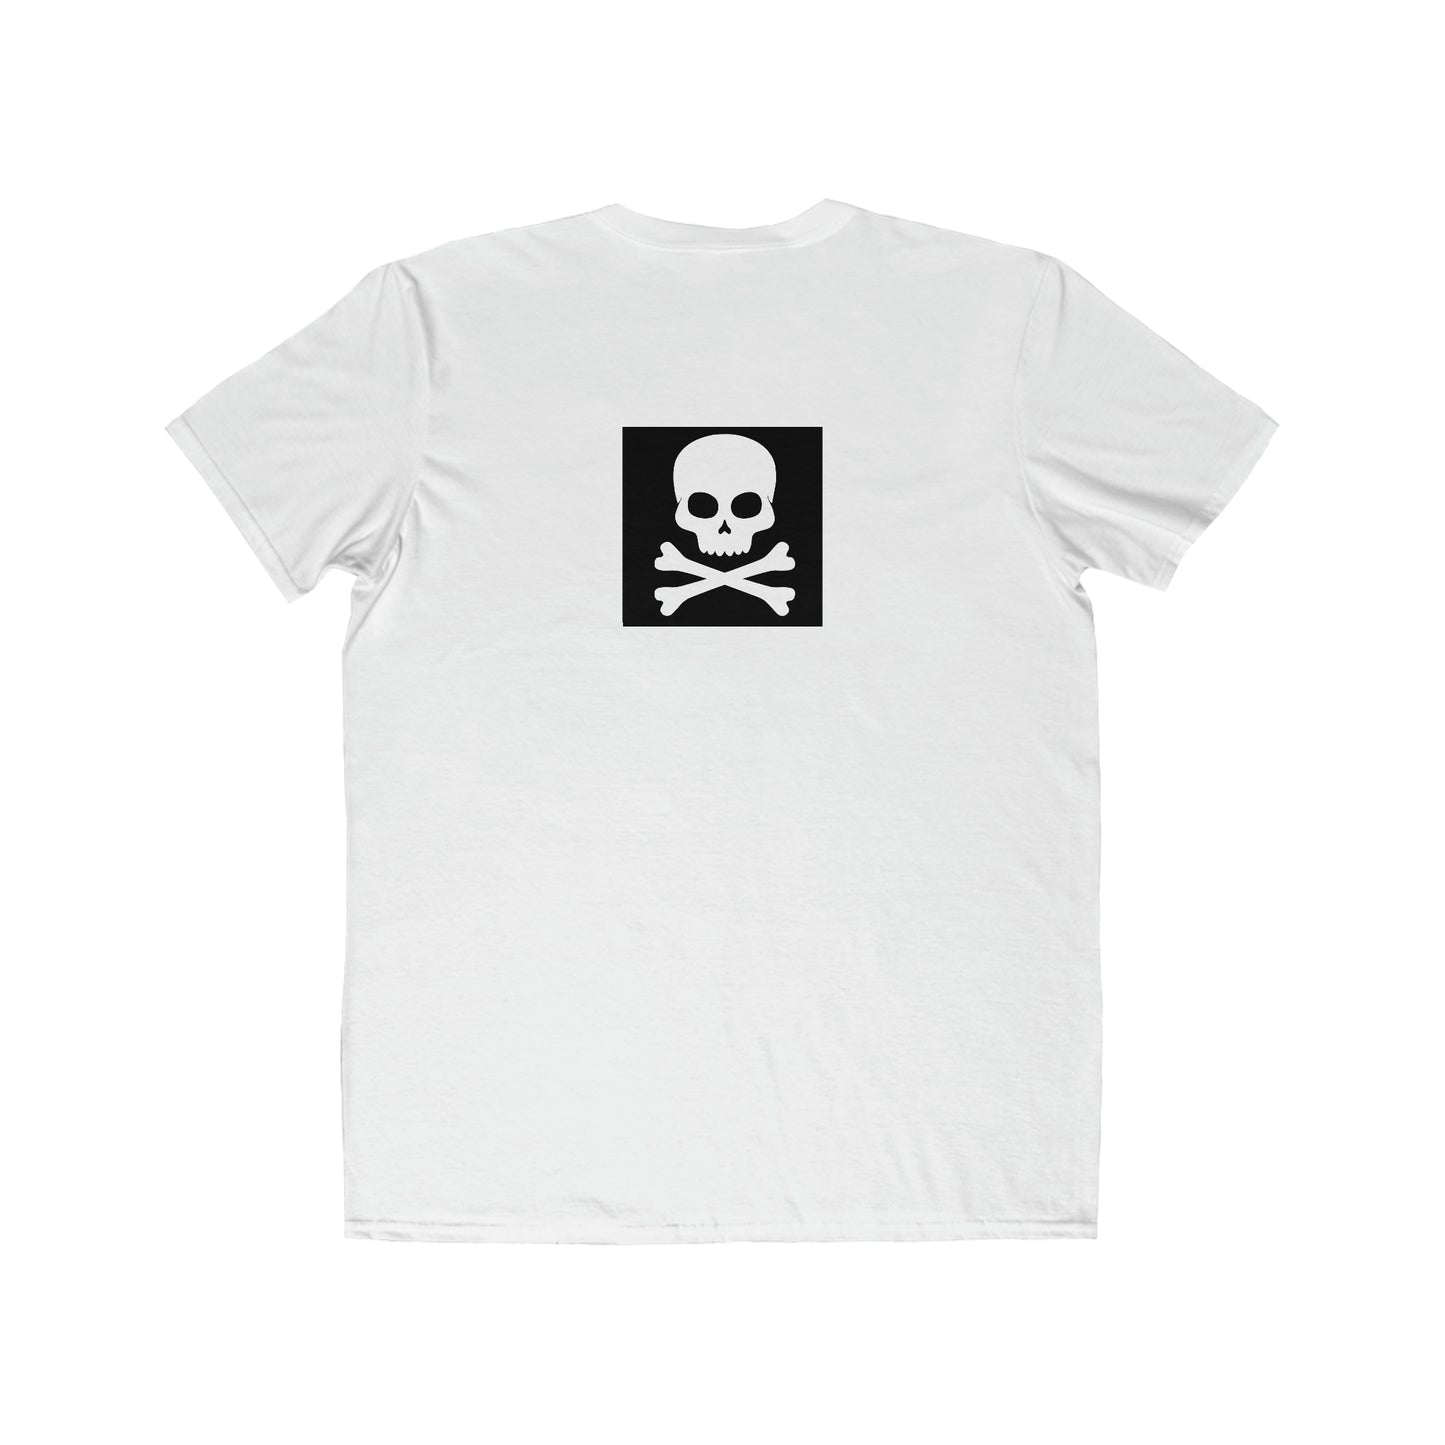 "Rewind-Time | Classic Pirata. Knives-Out Edition" - Tee